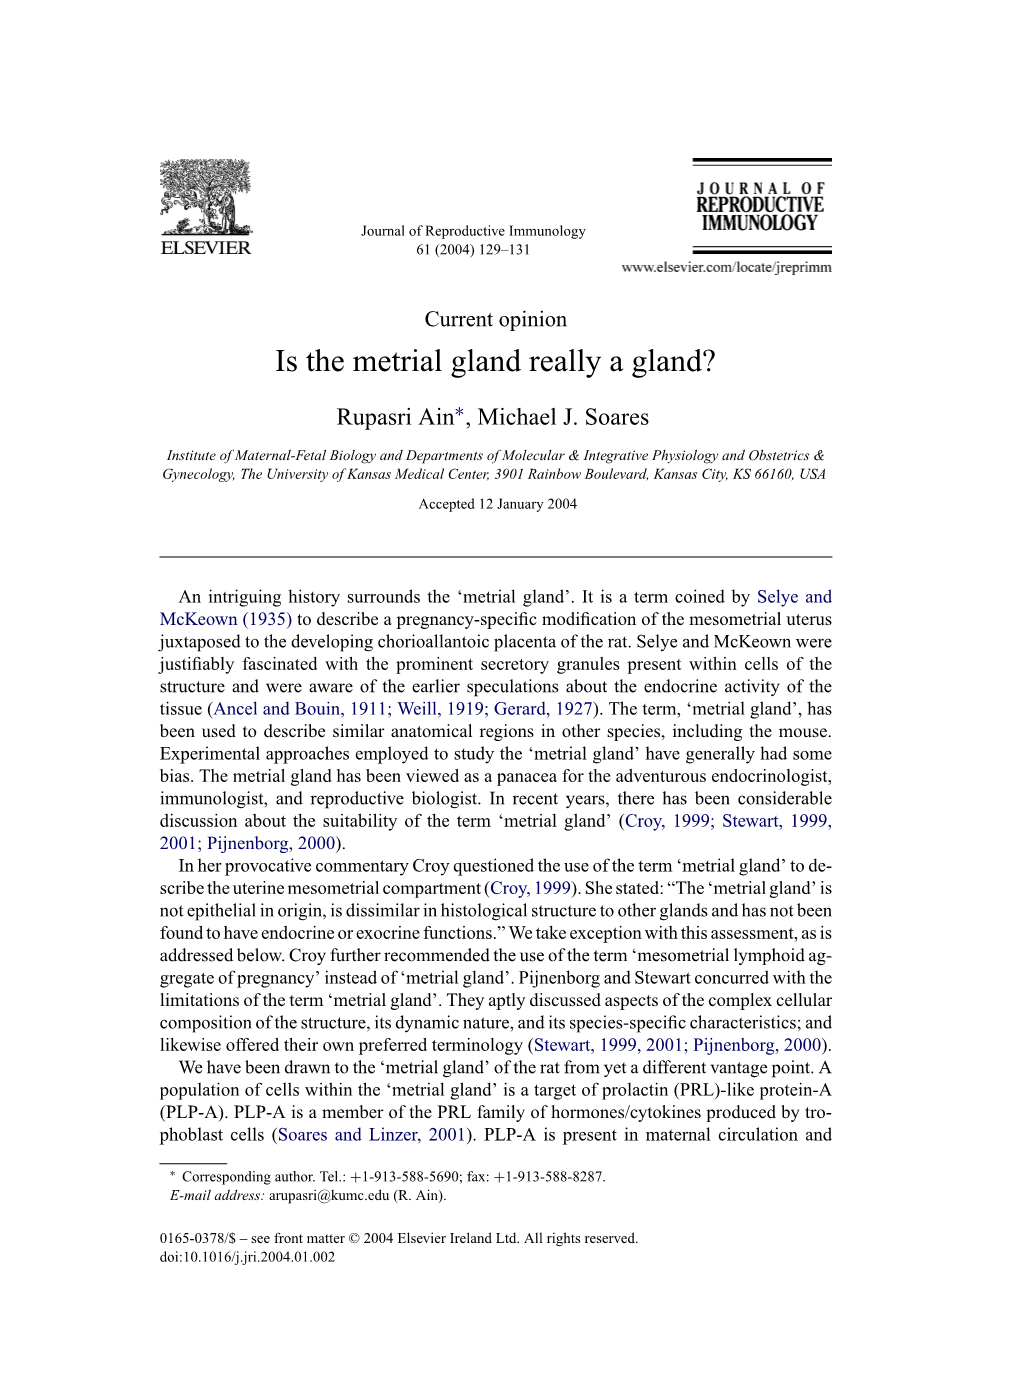 Is the Metrial Gland Really a Gland?